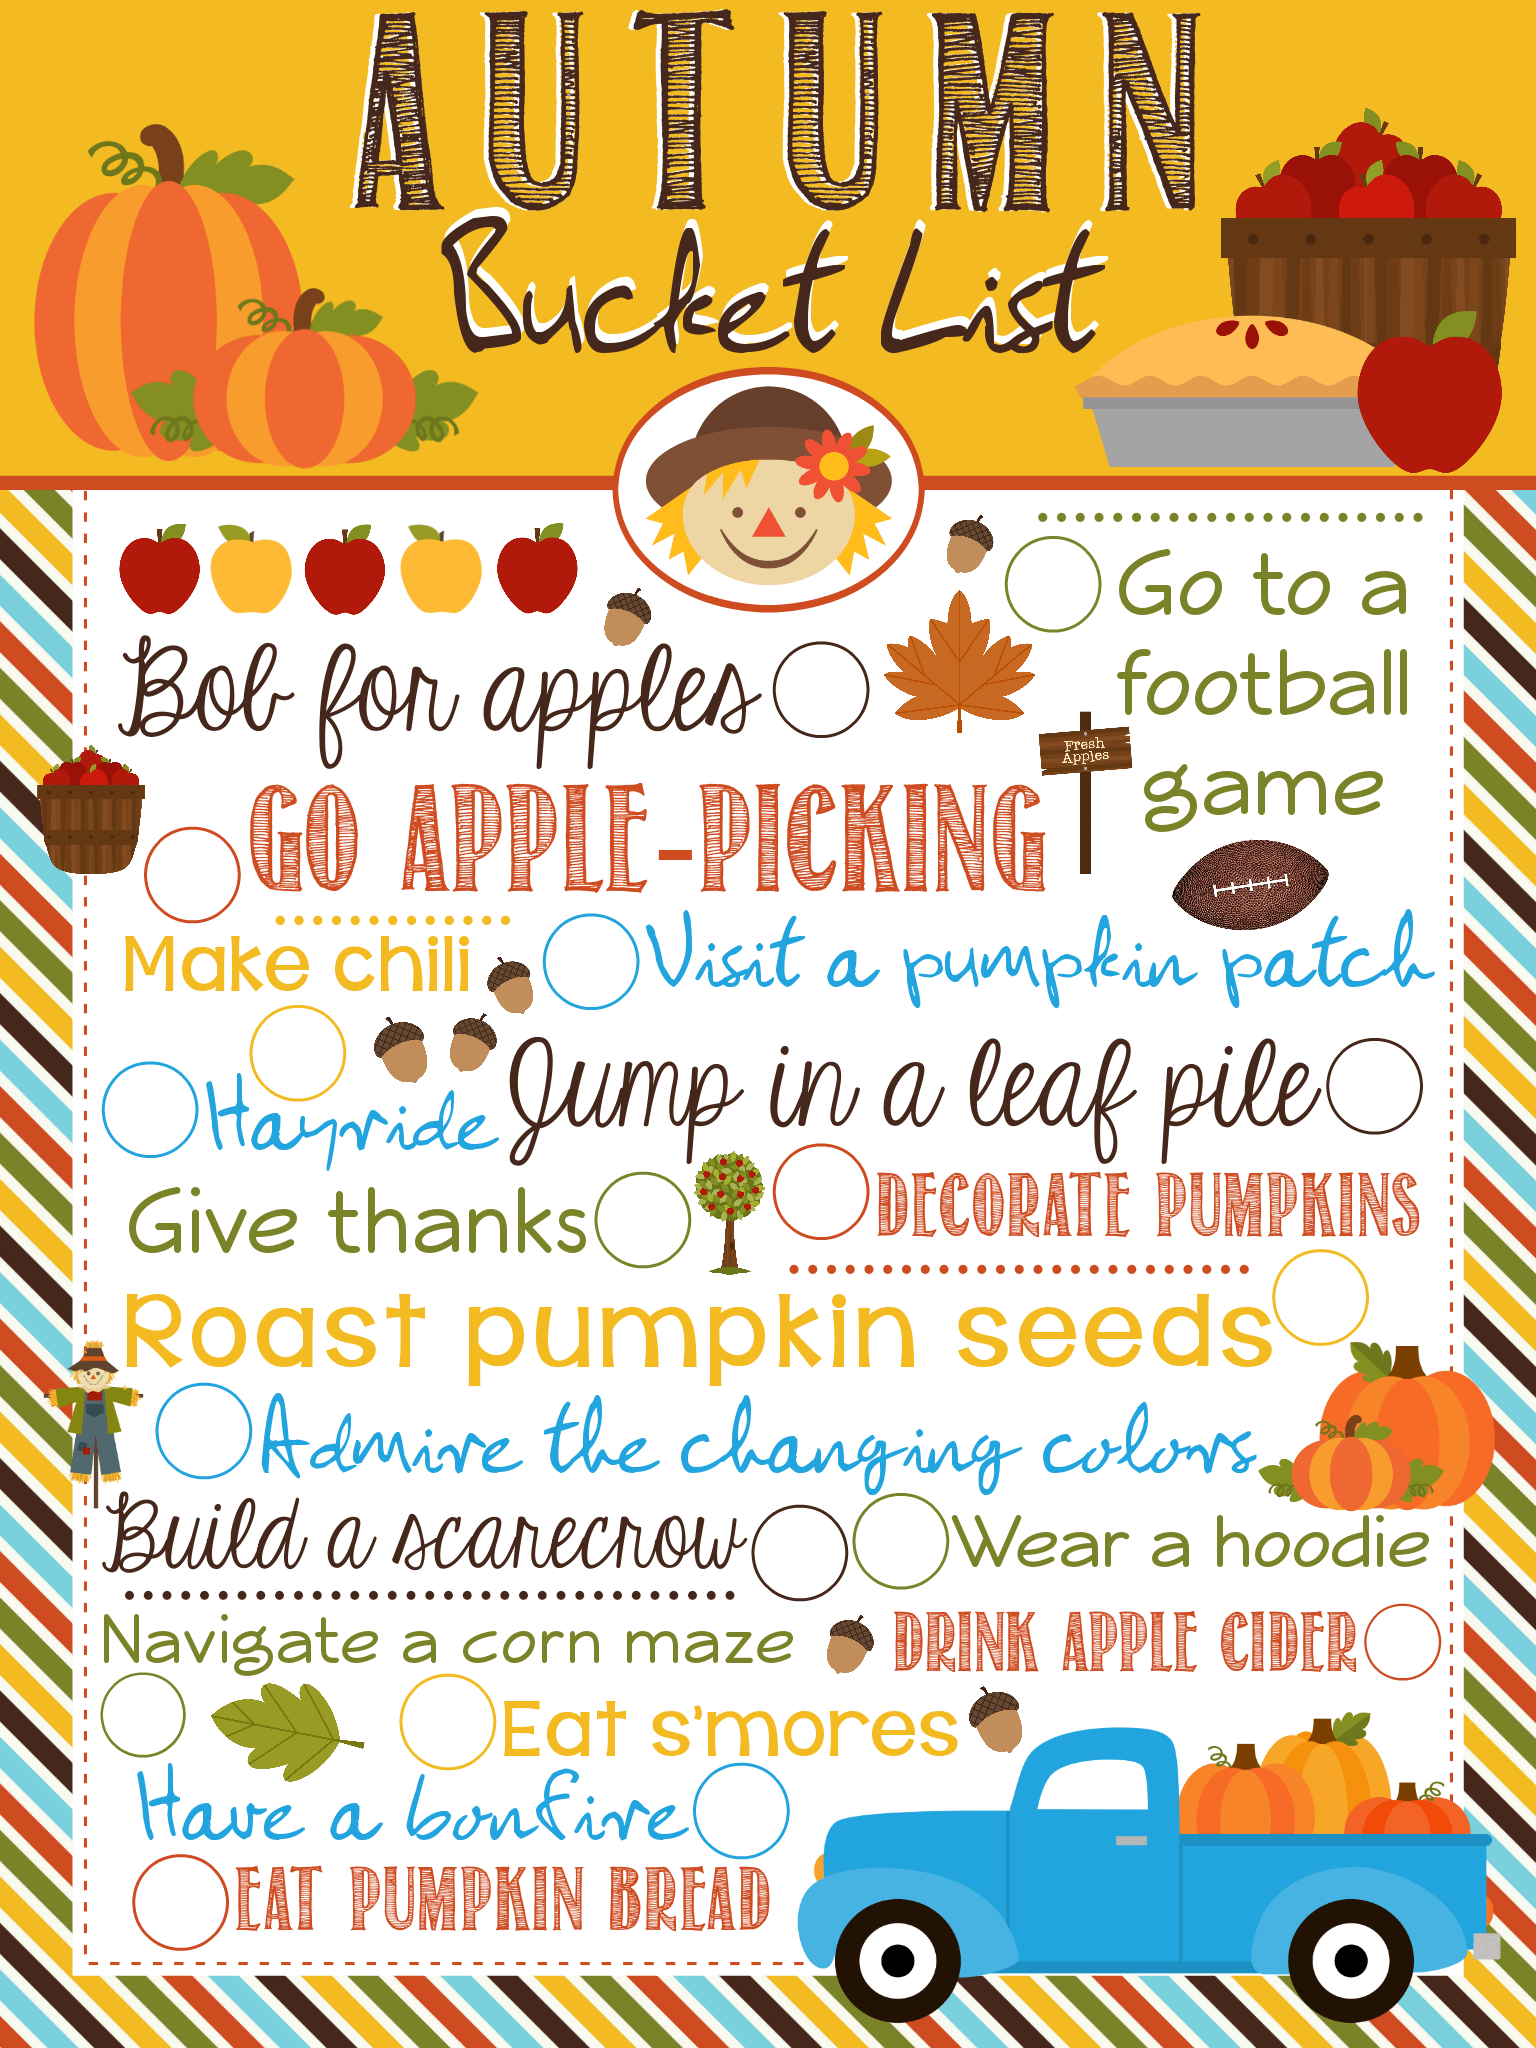 This Autumn Bucket List is a free download that you can print and display in your home with loads of ideas for a fun Fall season. via @jugglingactmama